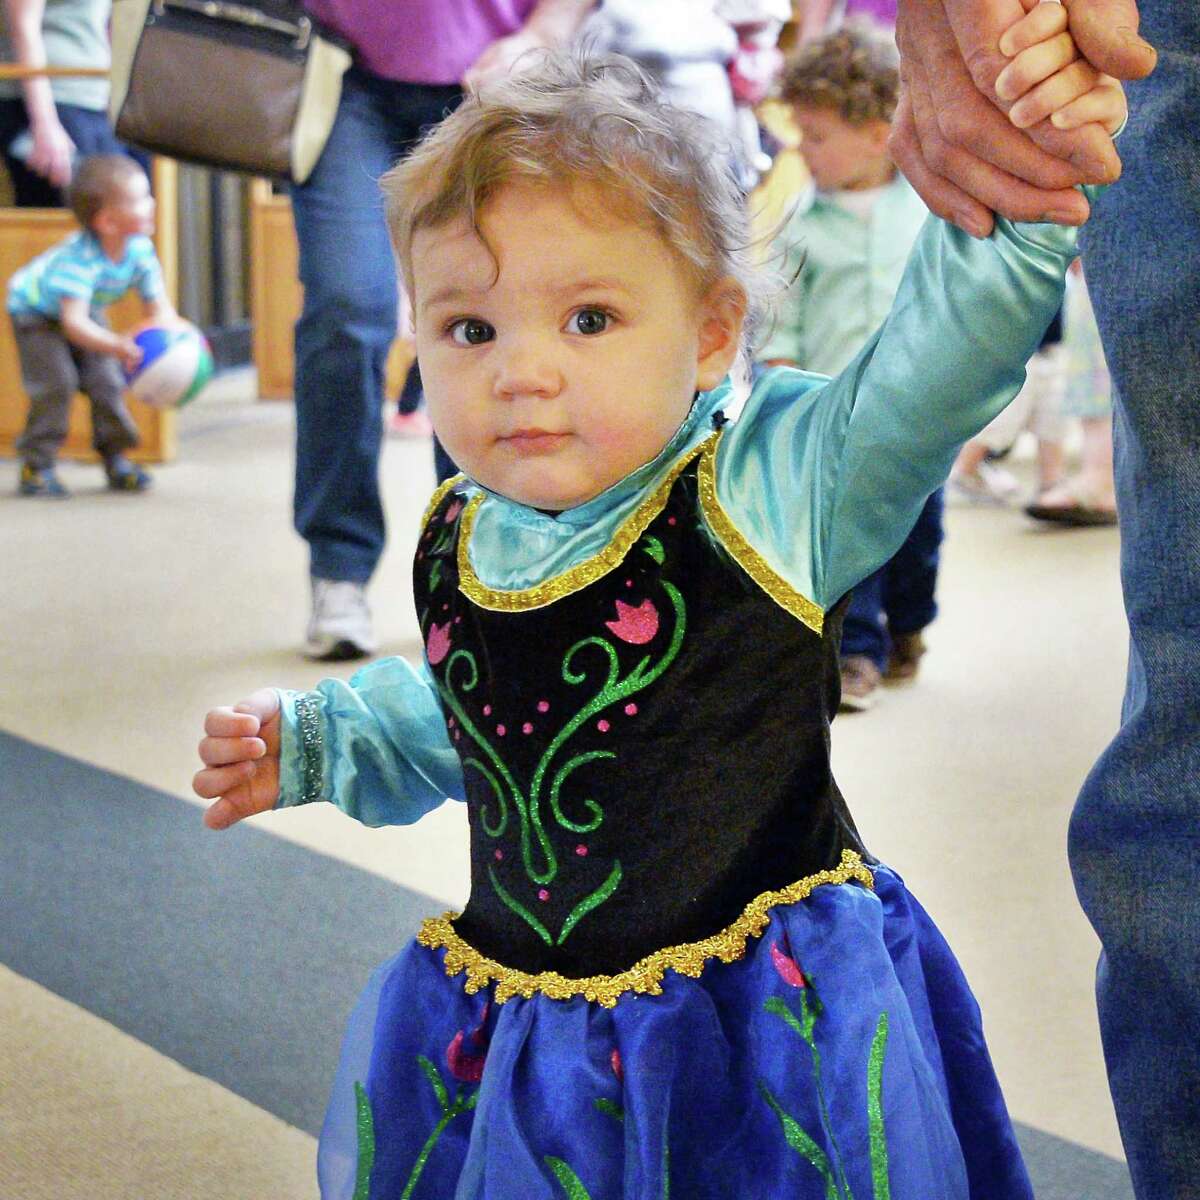 One-year-old Alyssa McVoy of Delmar joins the parade through the Bethlehem Public Library as it hosts a Preschool Prom at the library Thursday May 19, 2016 in Delmar, NY. (John Carl D'Annibale / Times Union)